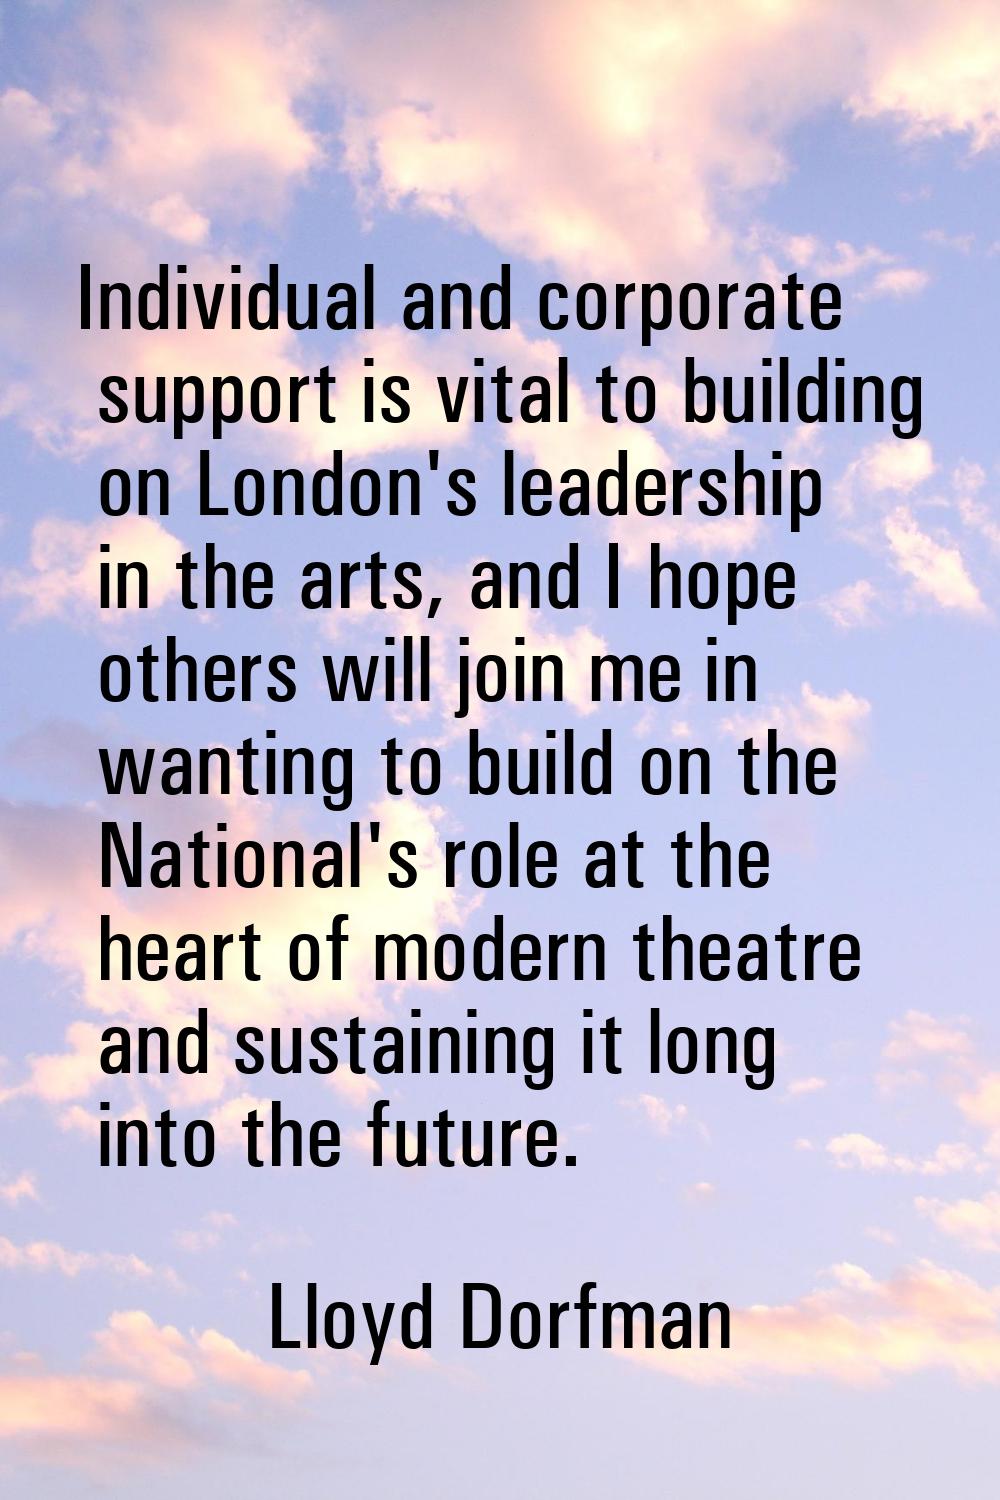 Individual and corporate support is vital to building on London's leadership in the arts, and I hop